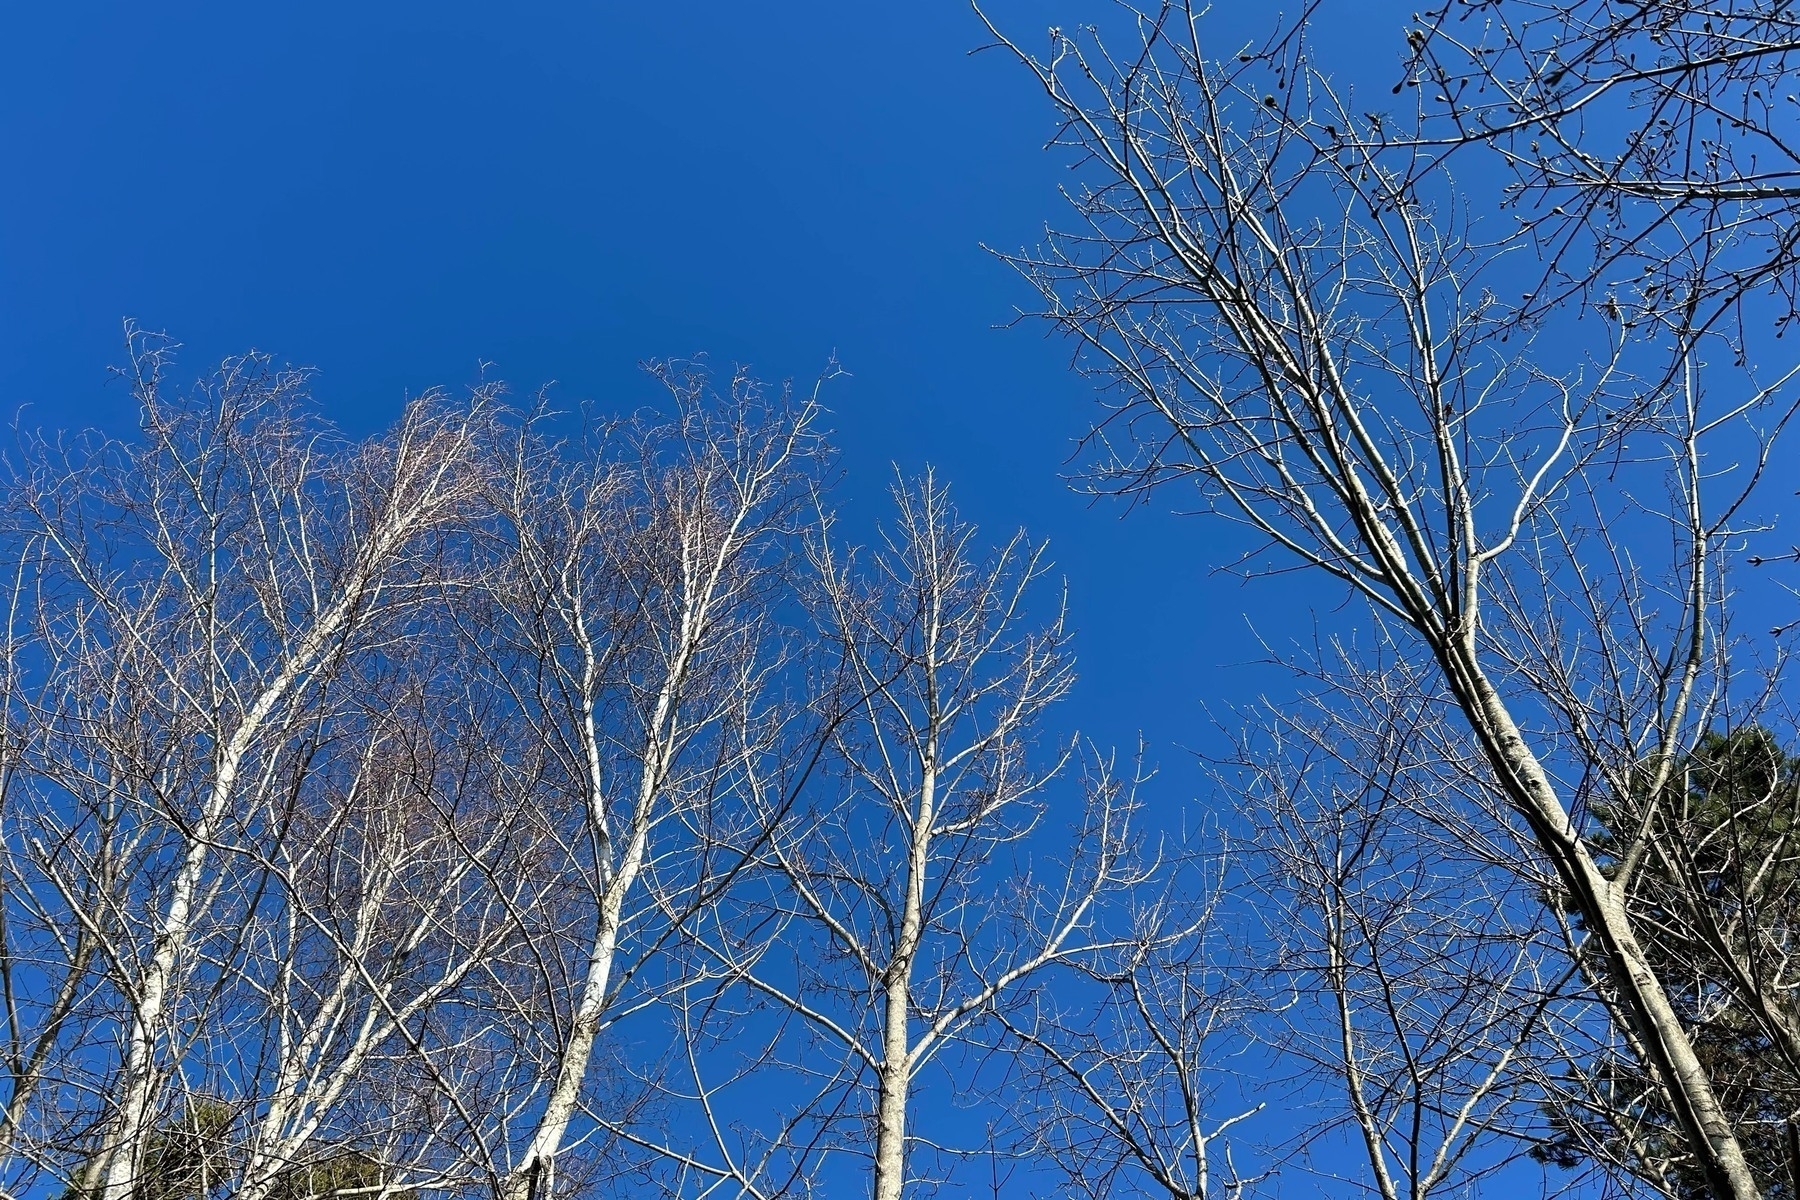 Leafless white birch trees with a clear blue sky behind them.